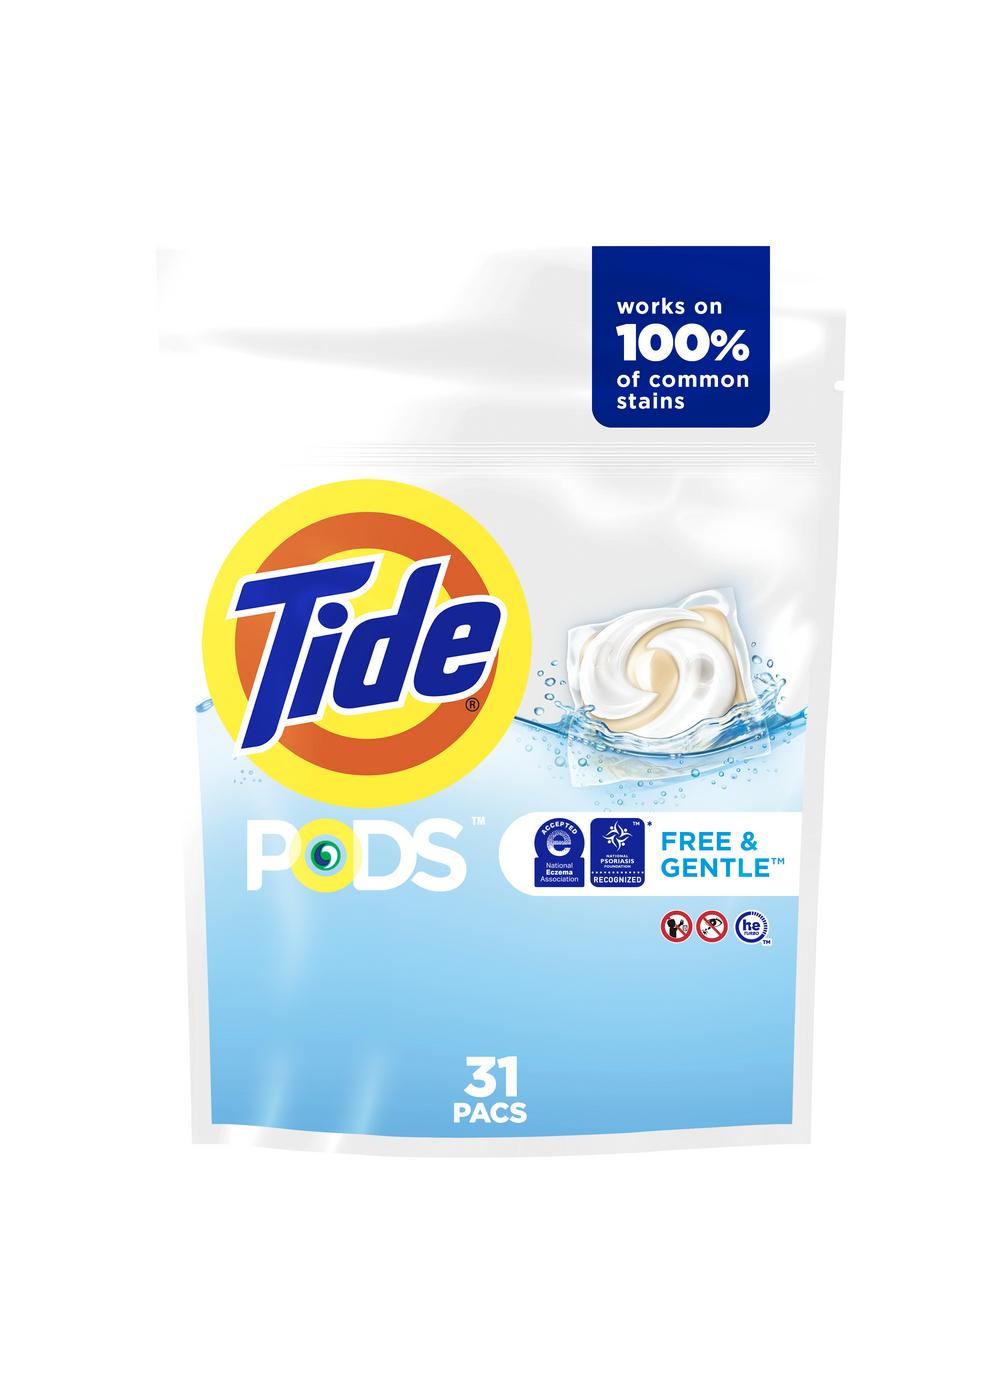 Laundry Detergent Pods, Free & Clear | Packaged